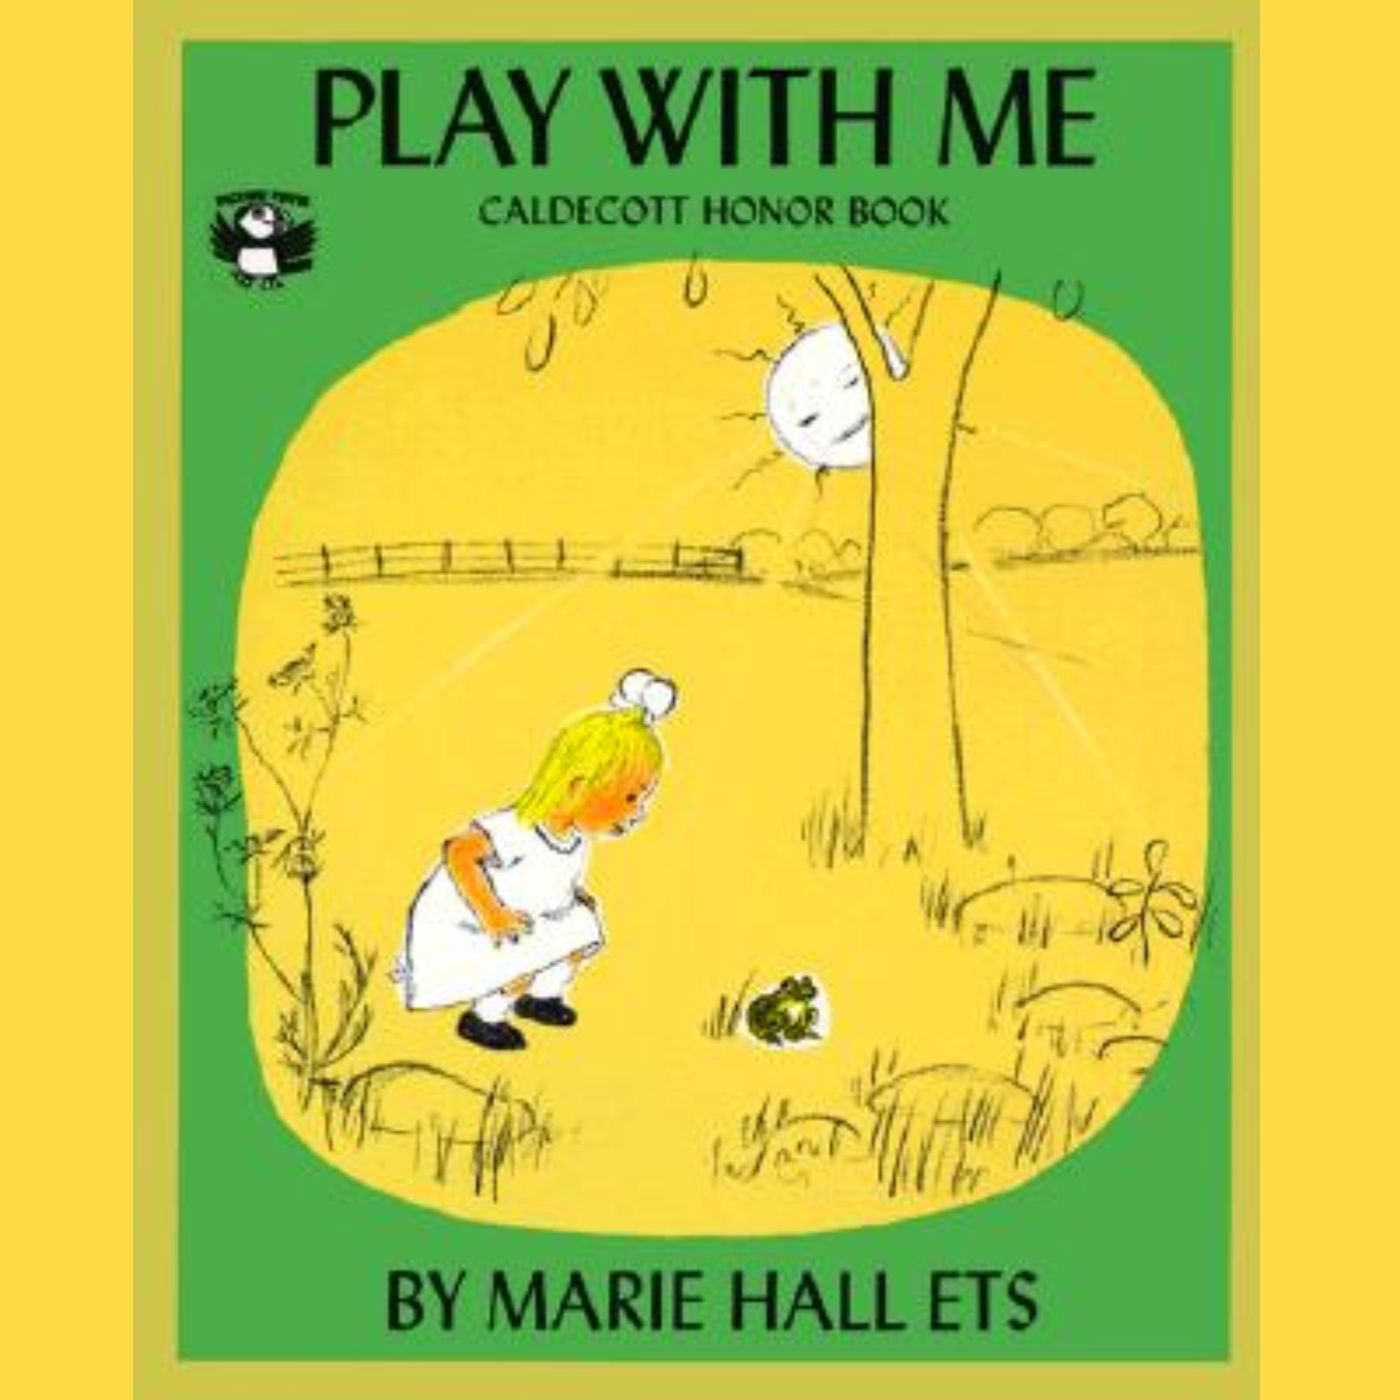 Play With Me by Marie Hall Ets - Read by Martyn Kenneth